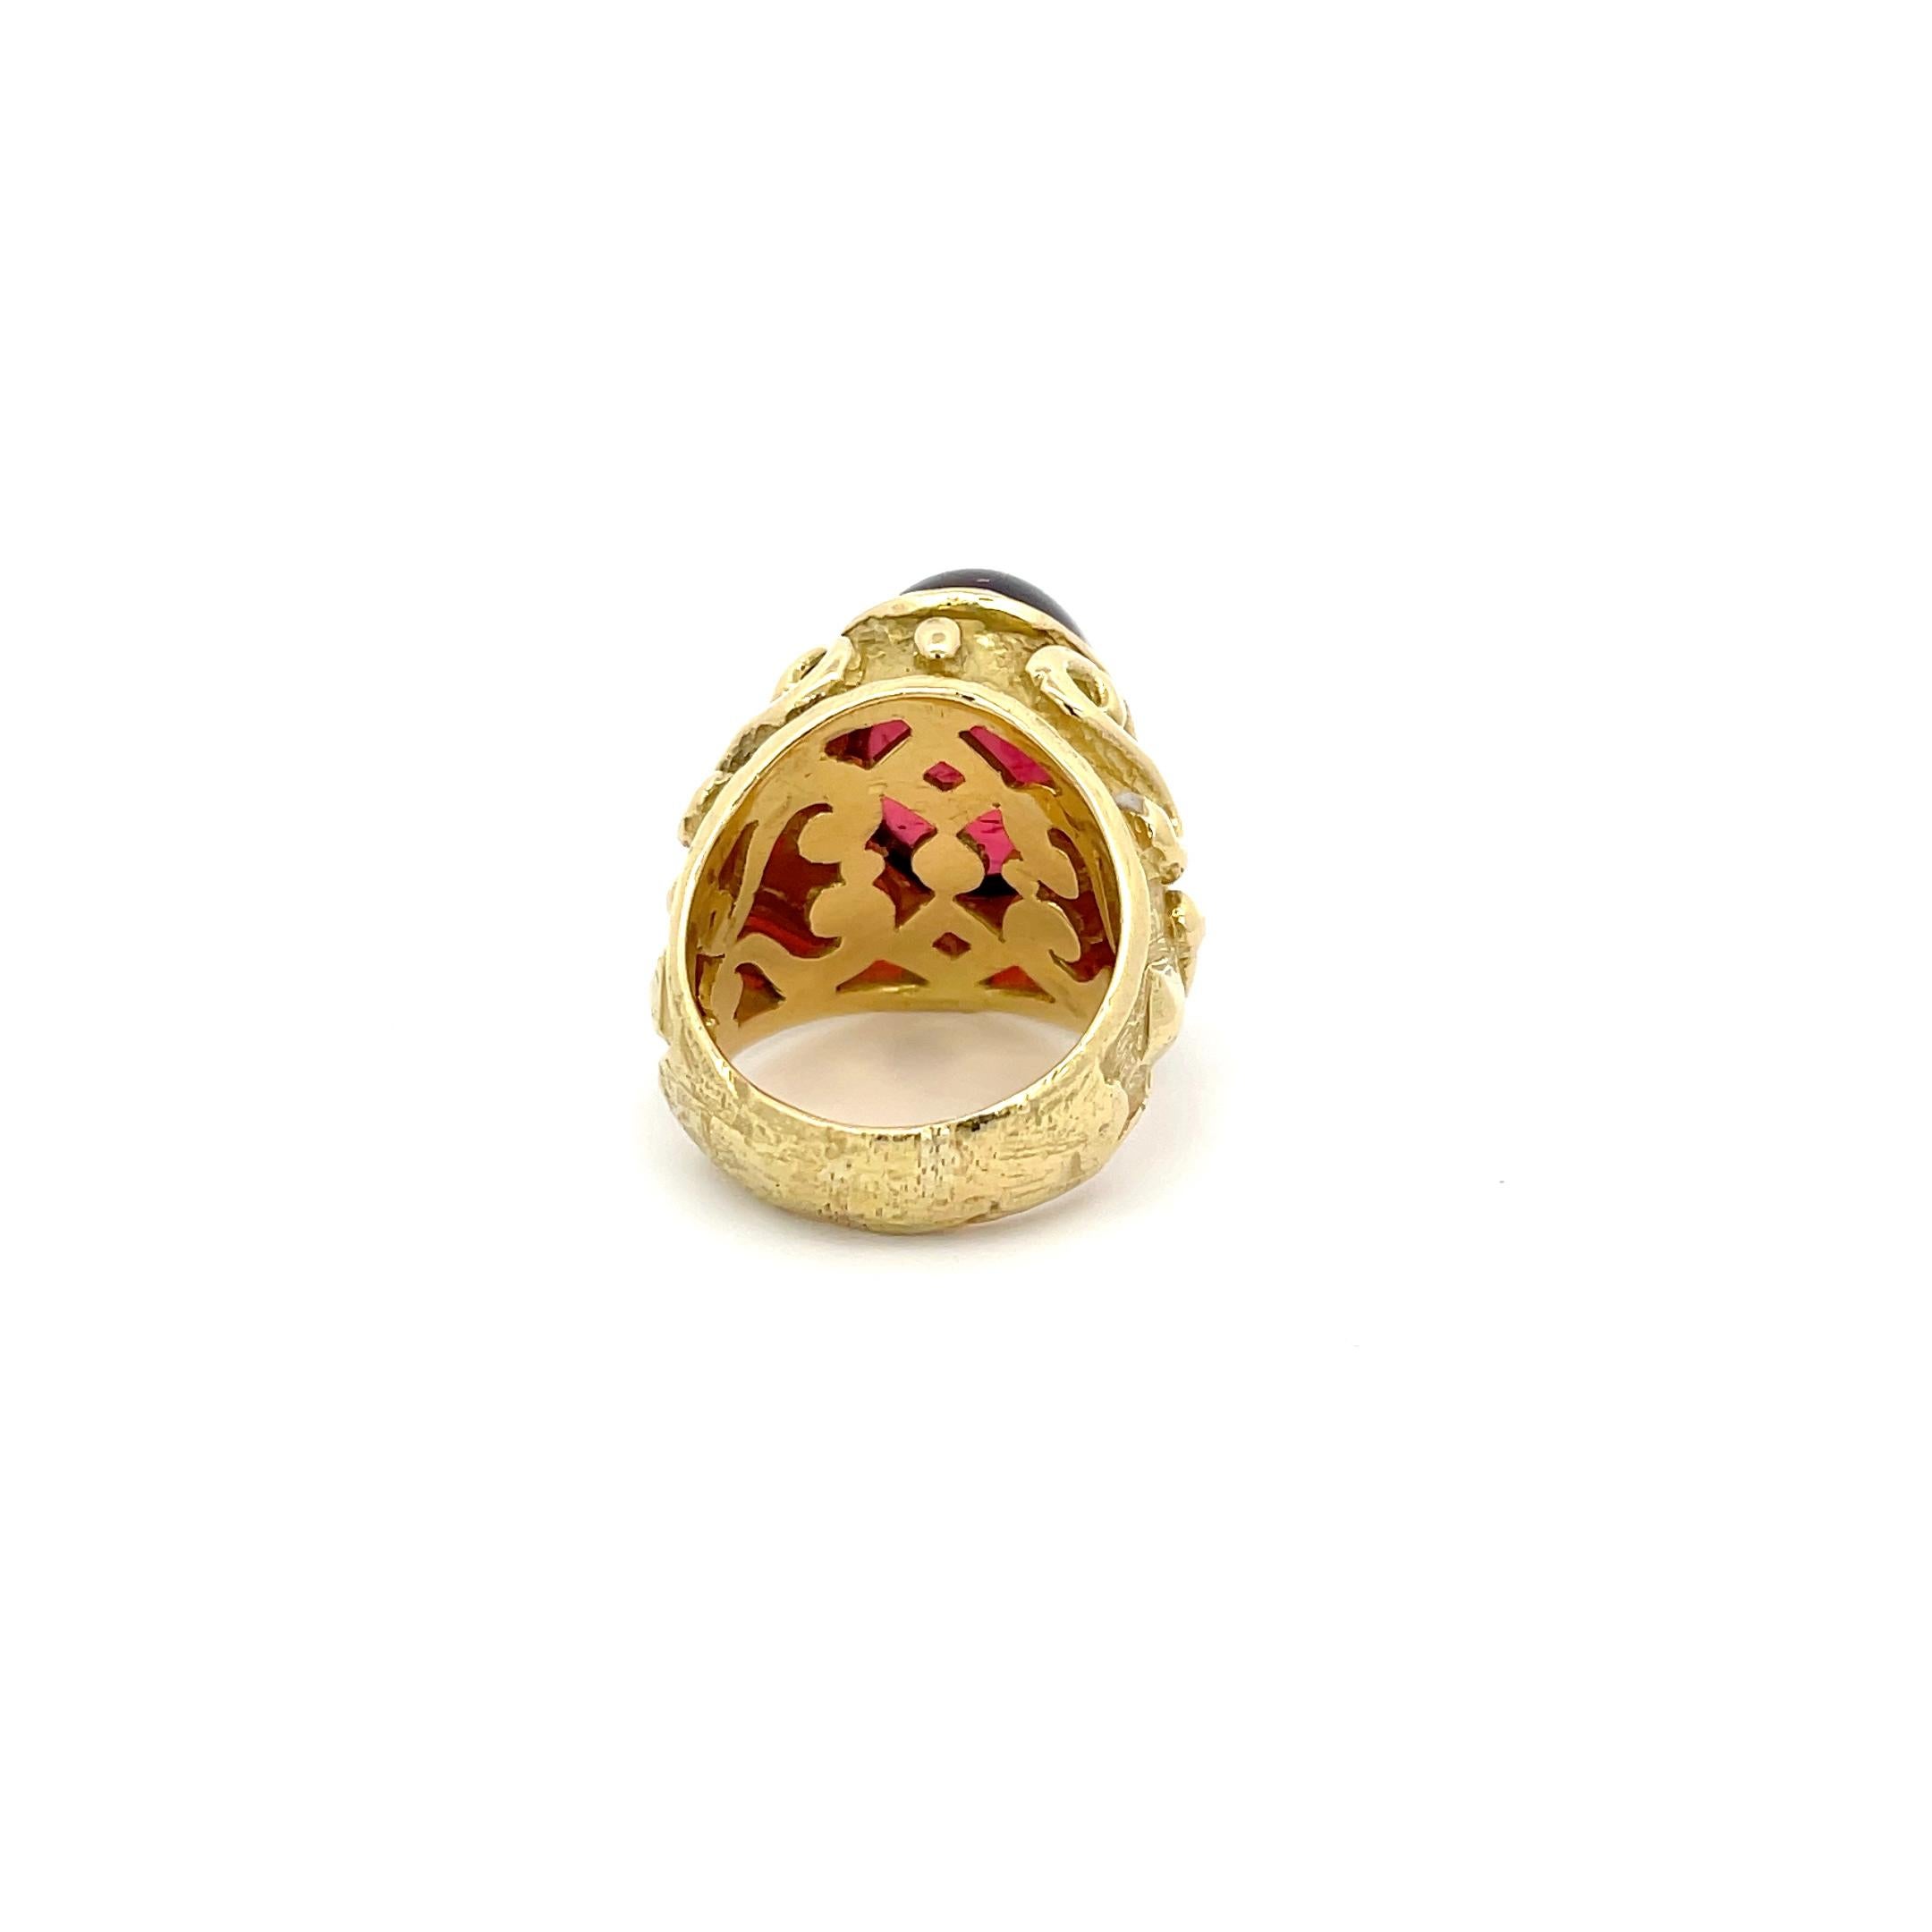 Katy Briscoe Cabochon Rubellite Ring in 18K Yellow Gold. The ring features a 20.41ct cabochon cut rubellite that has a vibrant raspberry pink color. The ring is accented by heavy scrollwork details. Size 8.5
25.1 Grams 